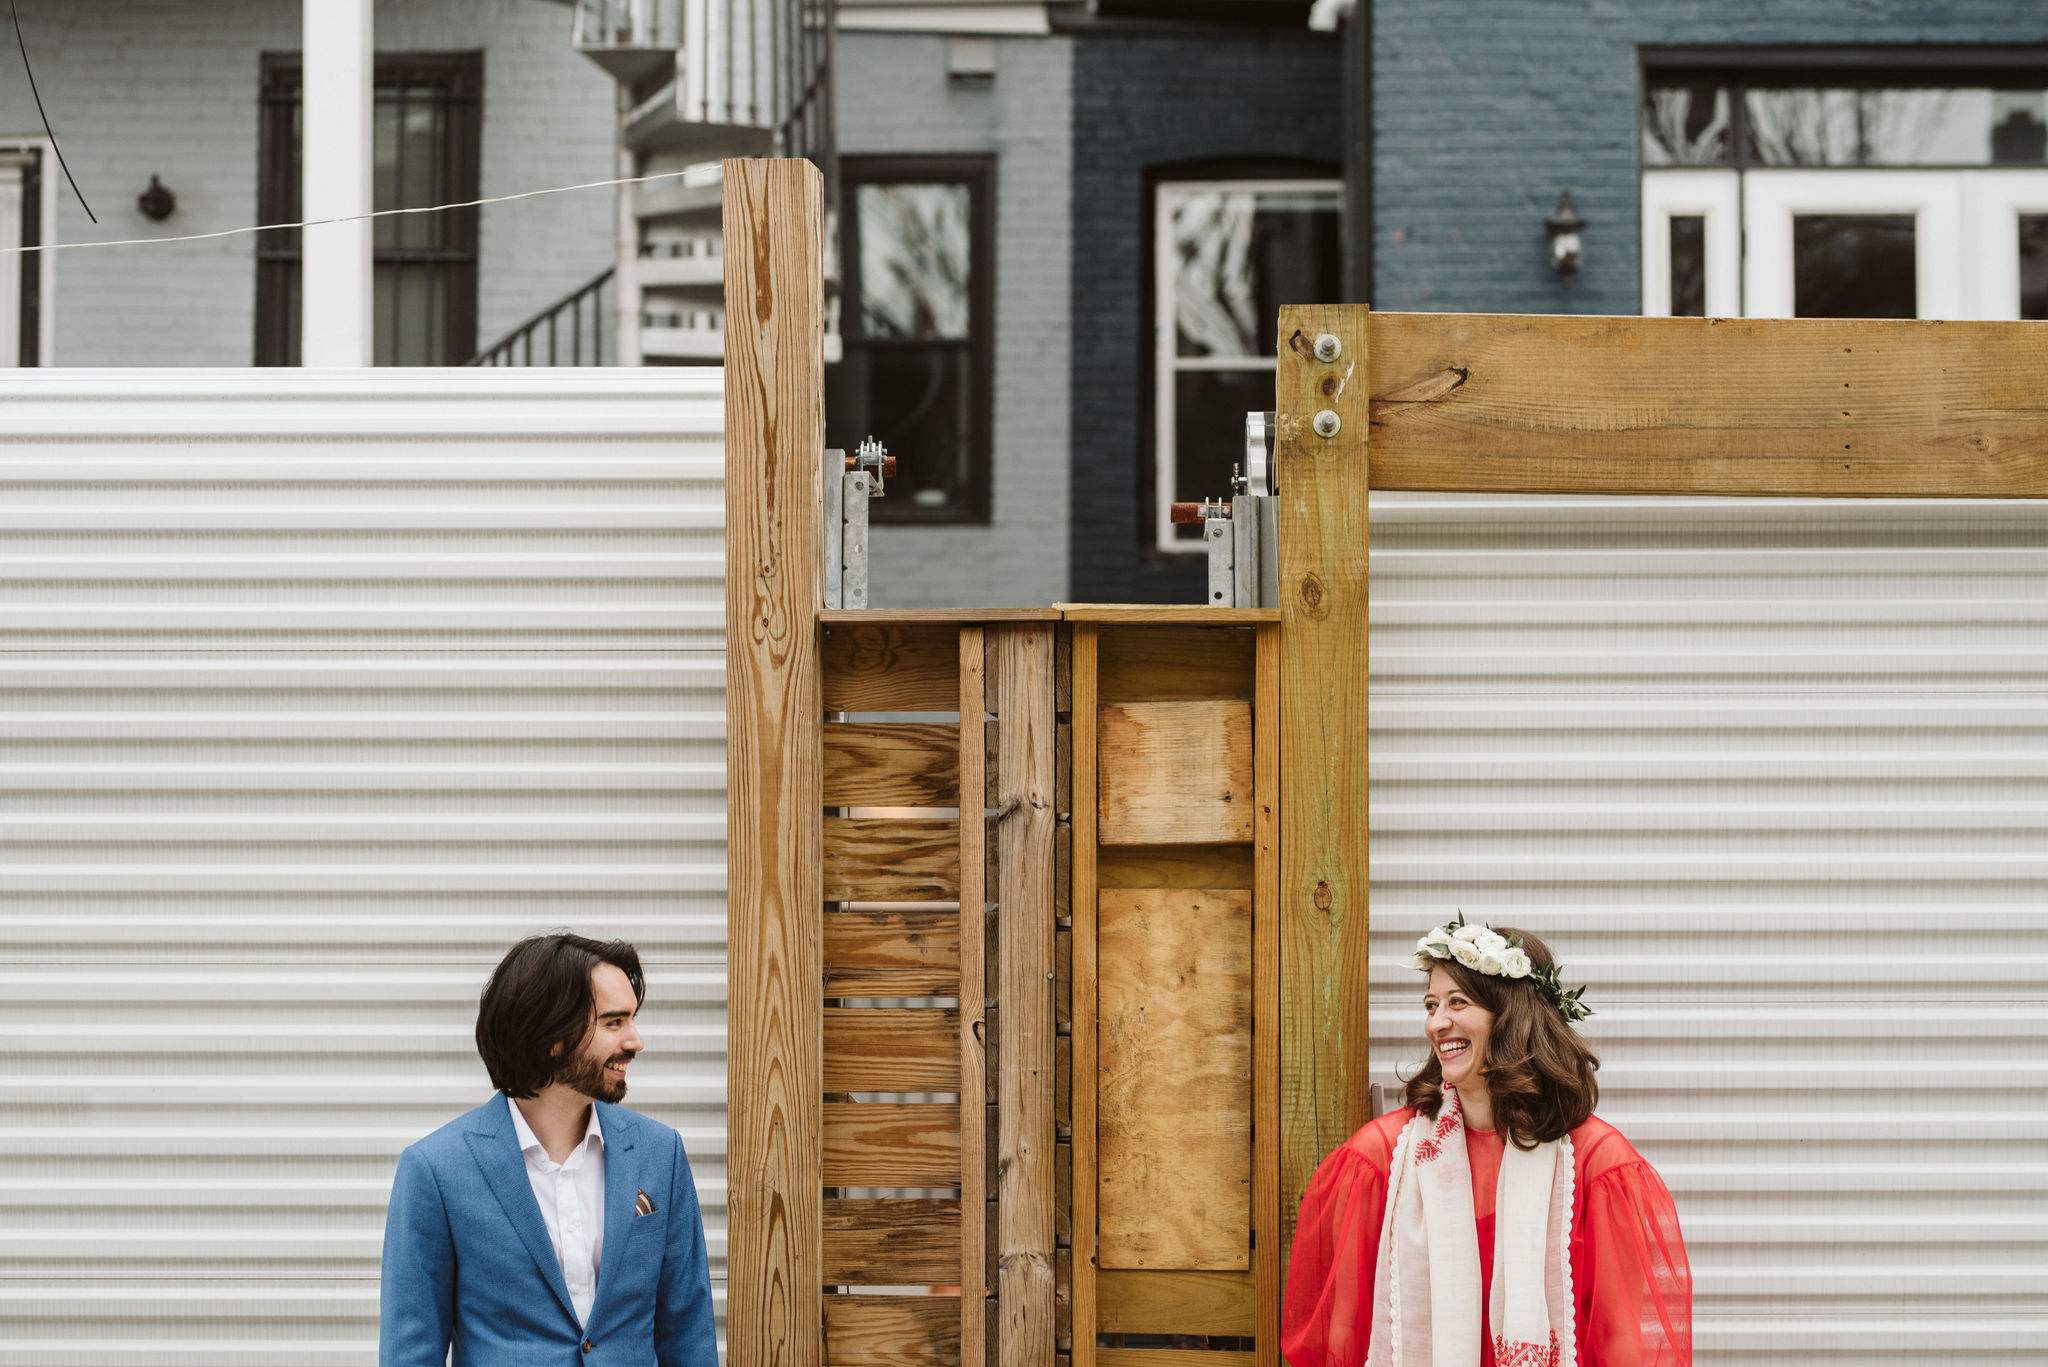  Washington DC, Baltimore Wedding Photographer, Intimate Wedding, Traditional, Classic, Palestinian, Portrait of Bride and Groom in Front of Industrial Gate, Couple Smiling at Each Other 